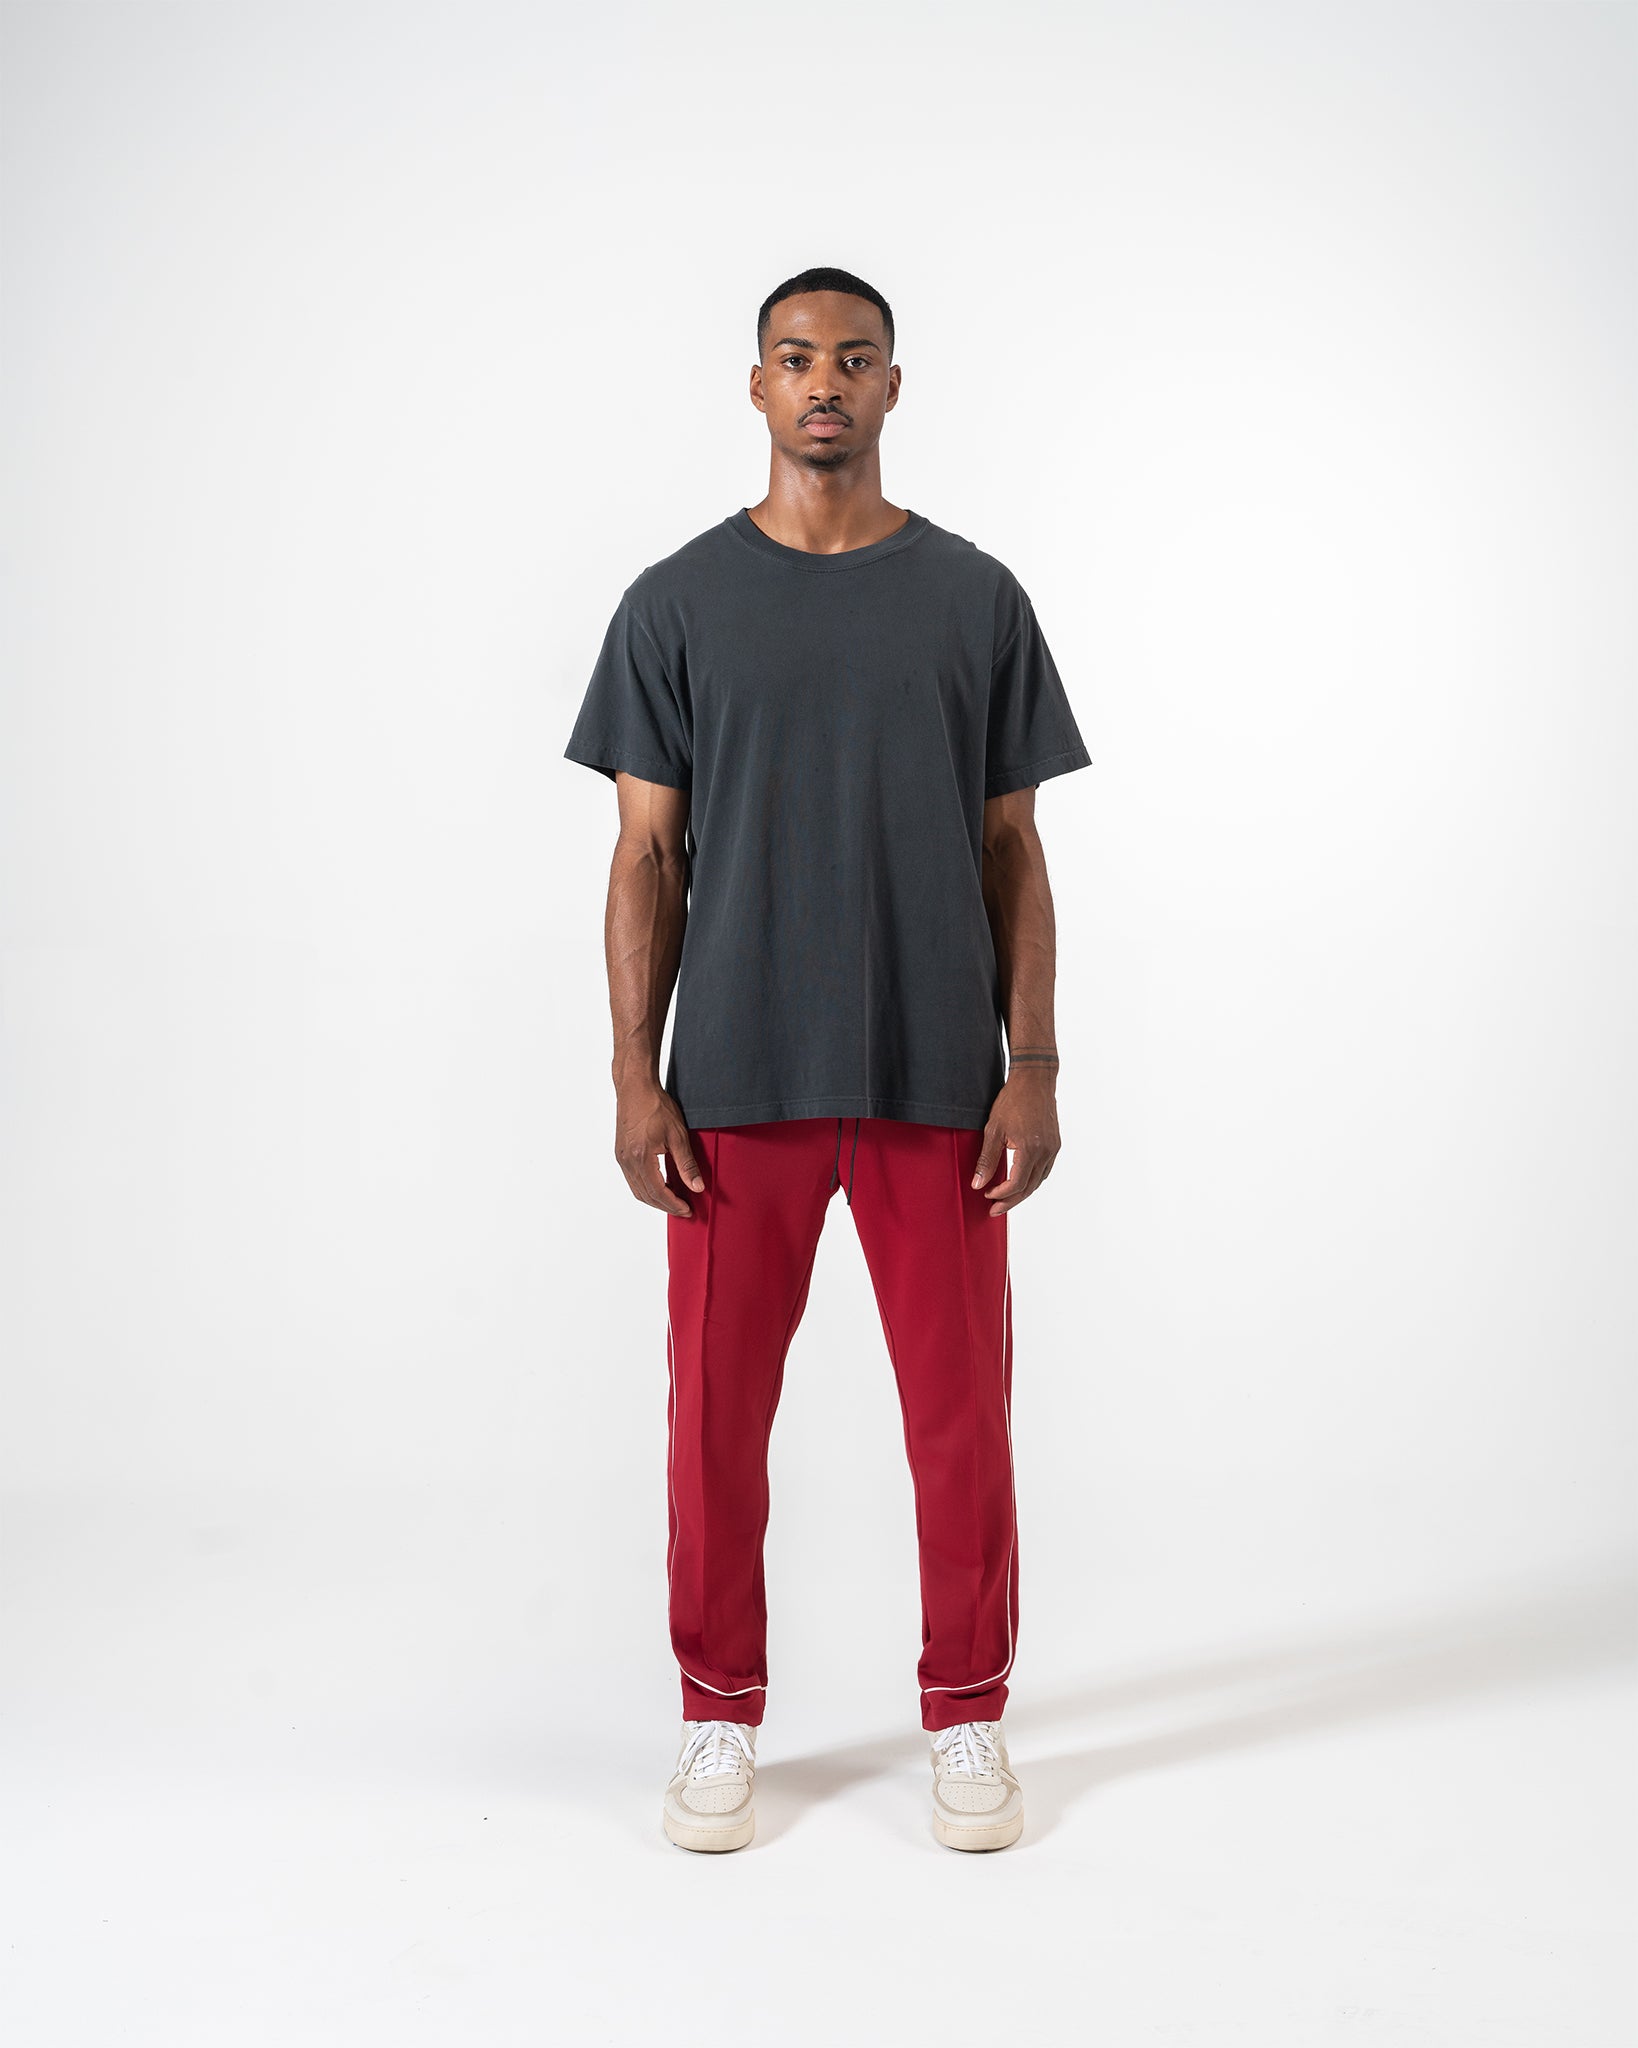 C2H4 - STAI BUCKLE TRACK PANTS | HBX - Globally Curated Fashion and  Lifestyle by Hypebeast